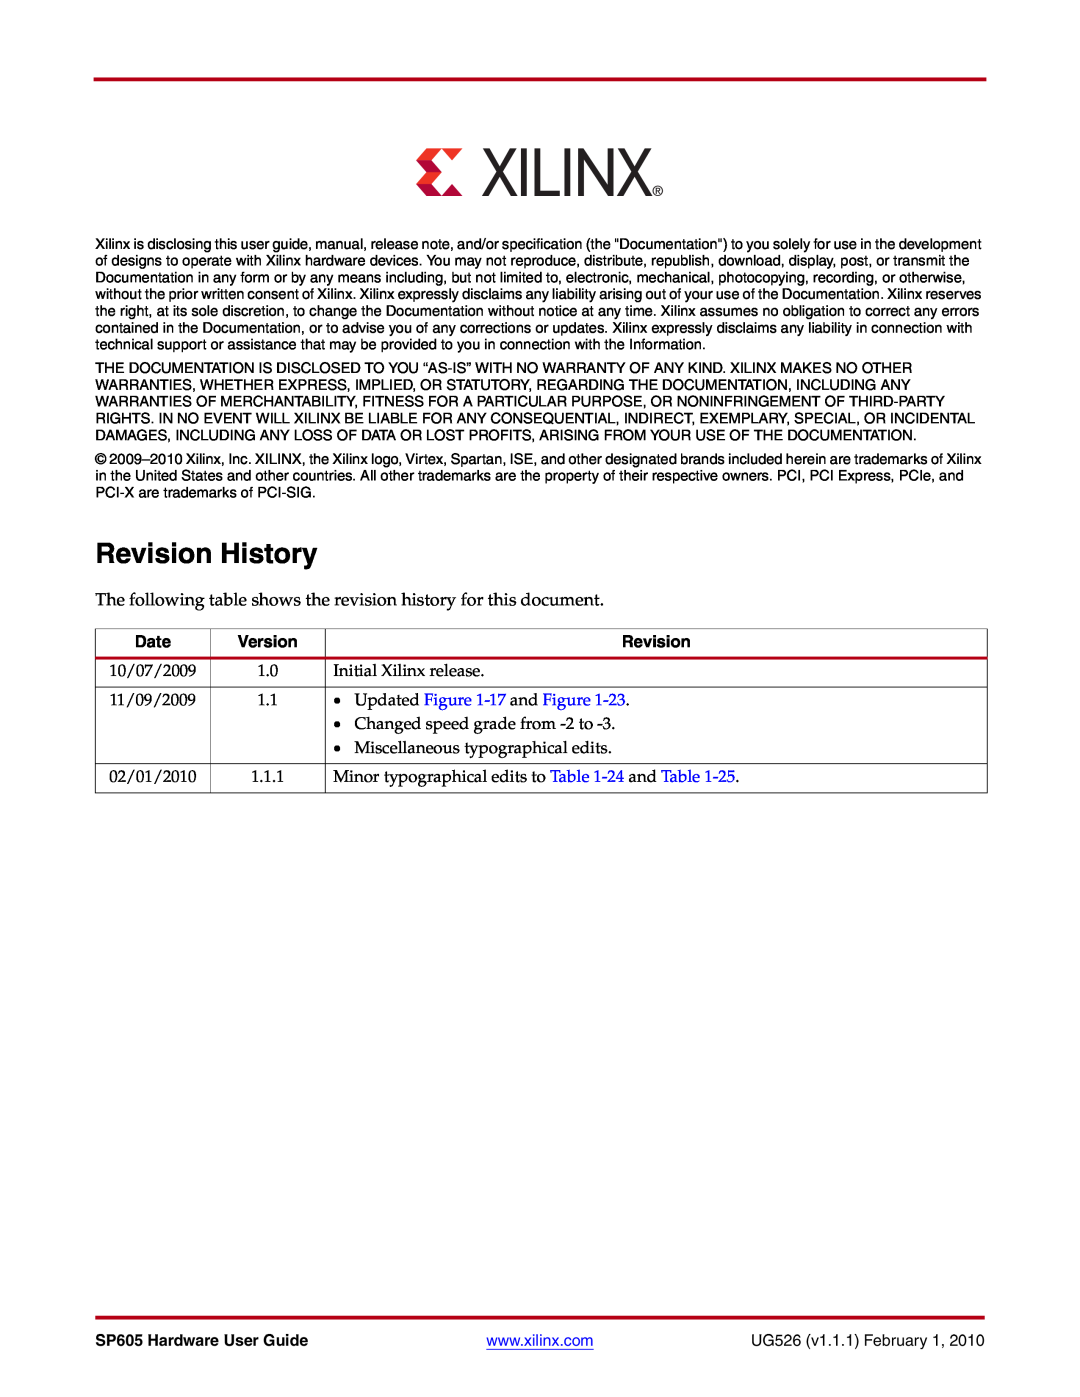 Xilinx SP605 manual Revision History, Date, Version, Updated -17 and Figure 